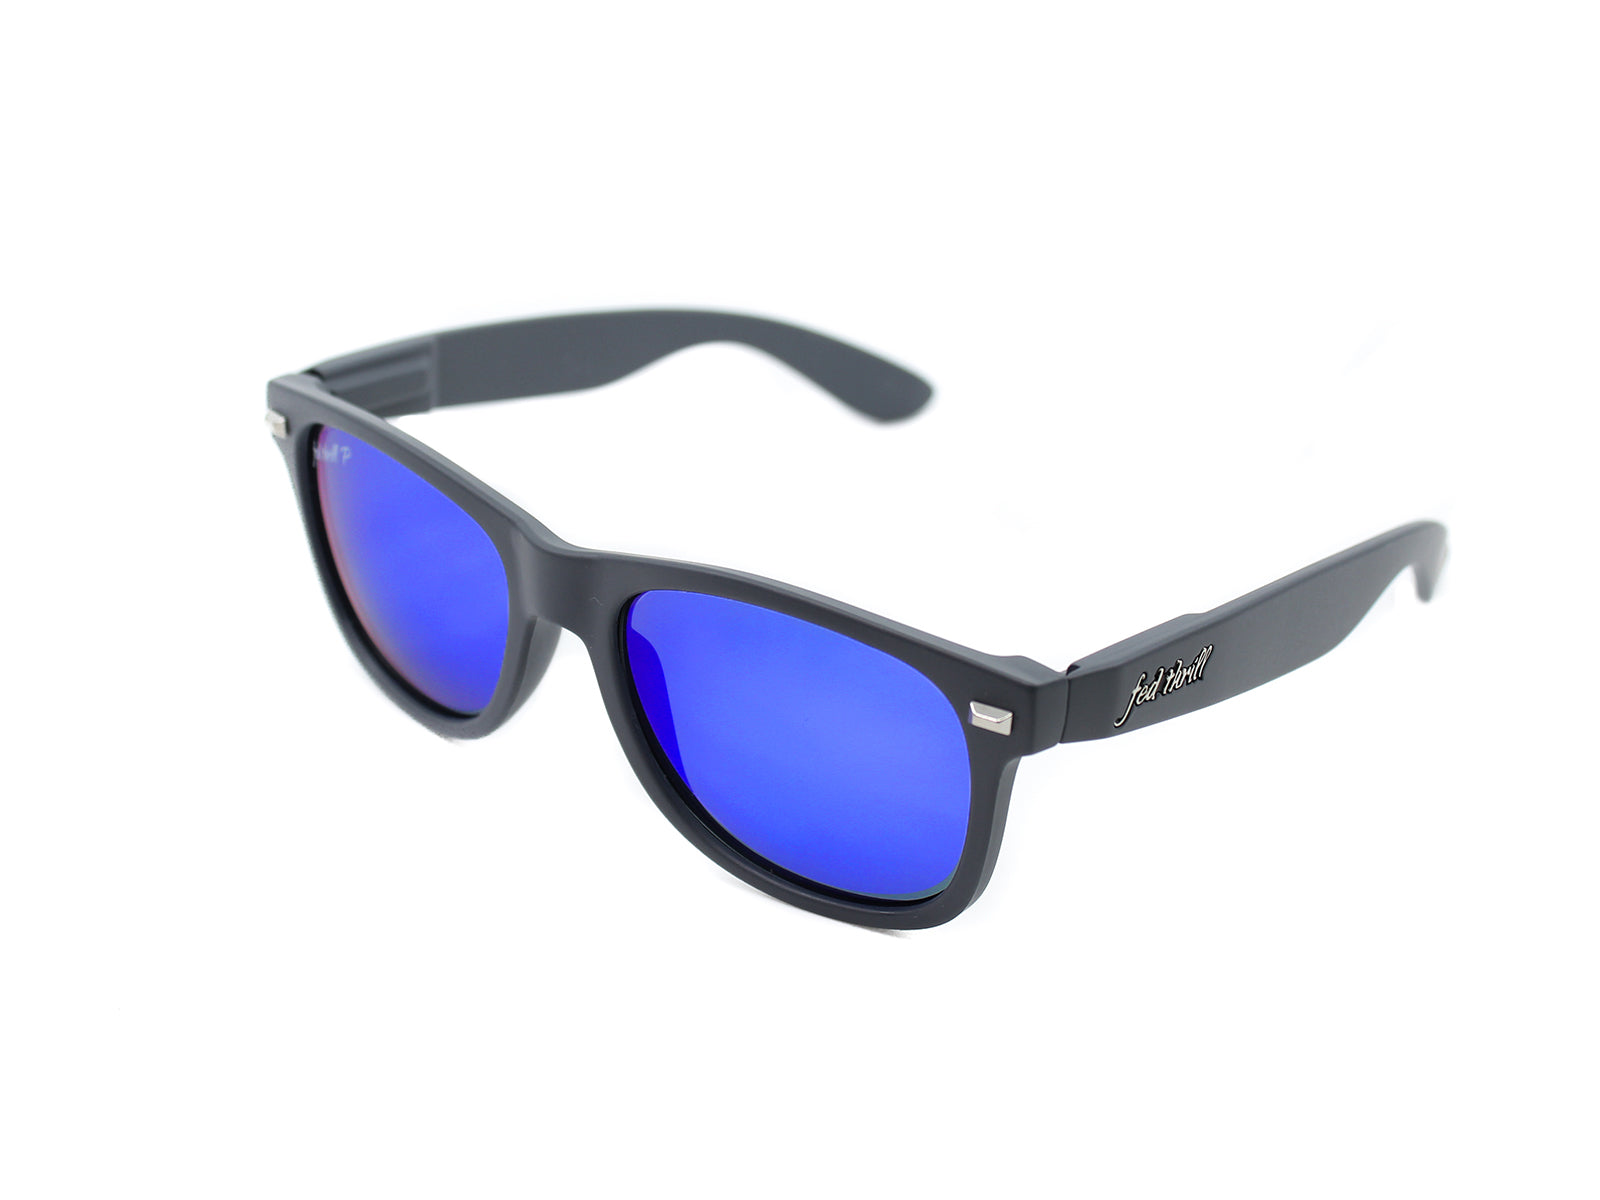 Fultons - Sage: Matte Gray / Mirrored Blue Polarized